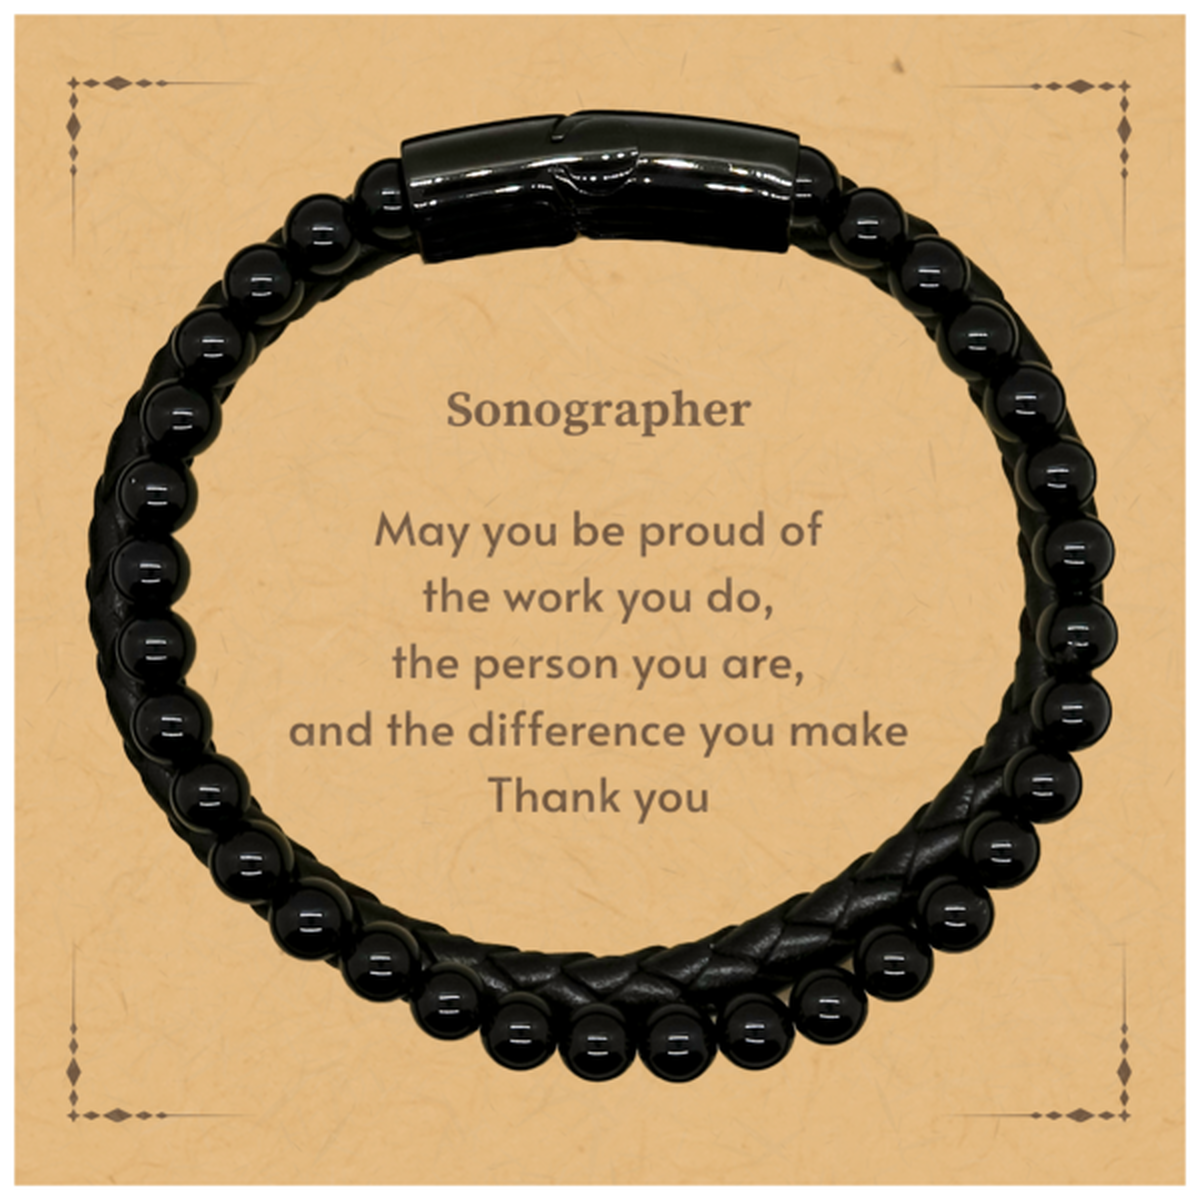 Heartwarming Stone Leather Bracelets Retirement Coworkers Gifts for Sonographer, Sonographer May You be proud of the work you do, the person you are Gifts for Boss Men Women Friends